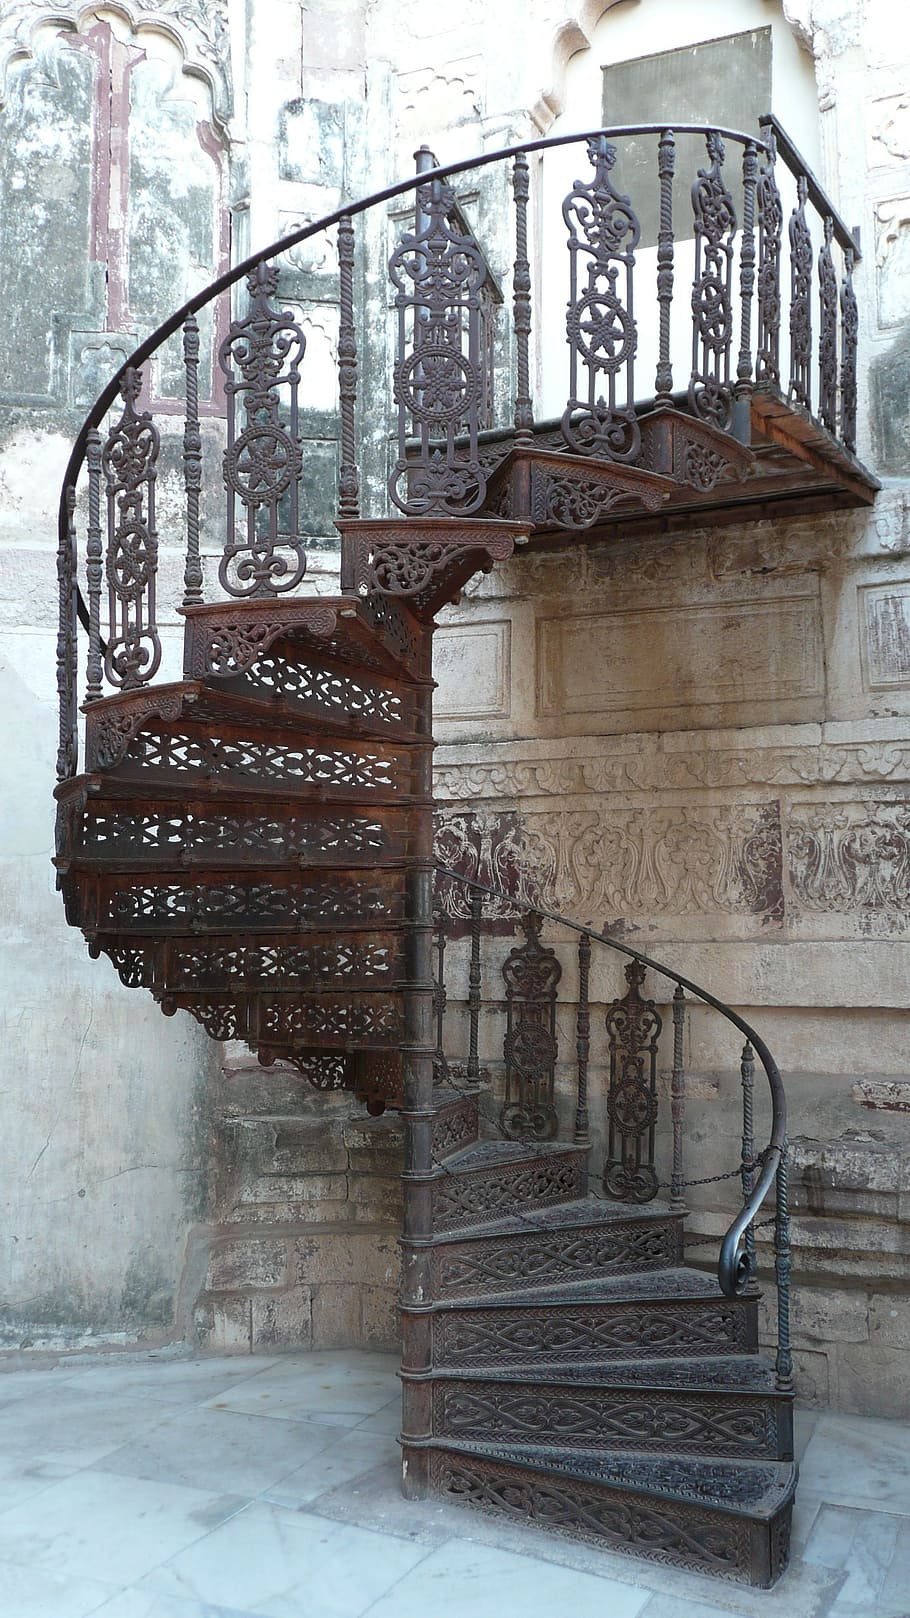 brown steel staircase, staircase, ironwork, former, hindu style, wrought iron, architecture, built structure, snow, winter